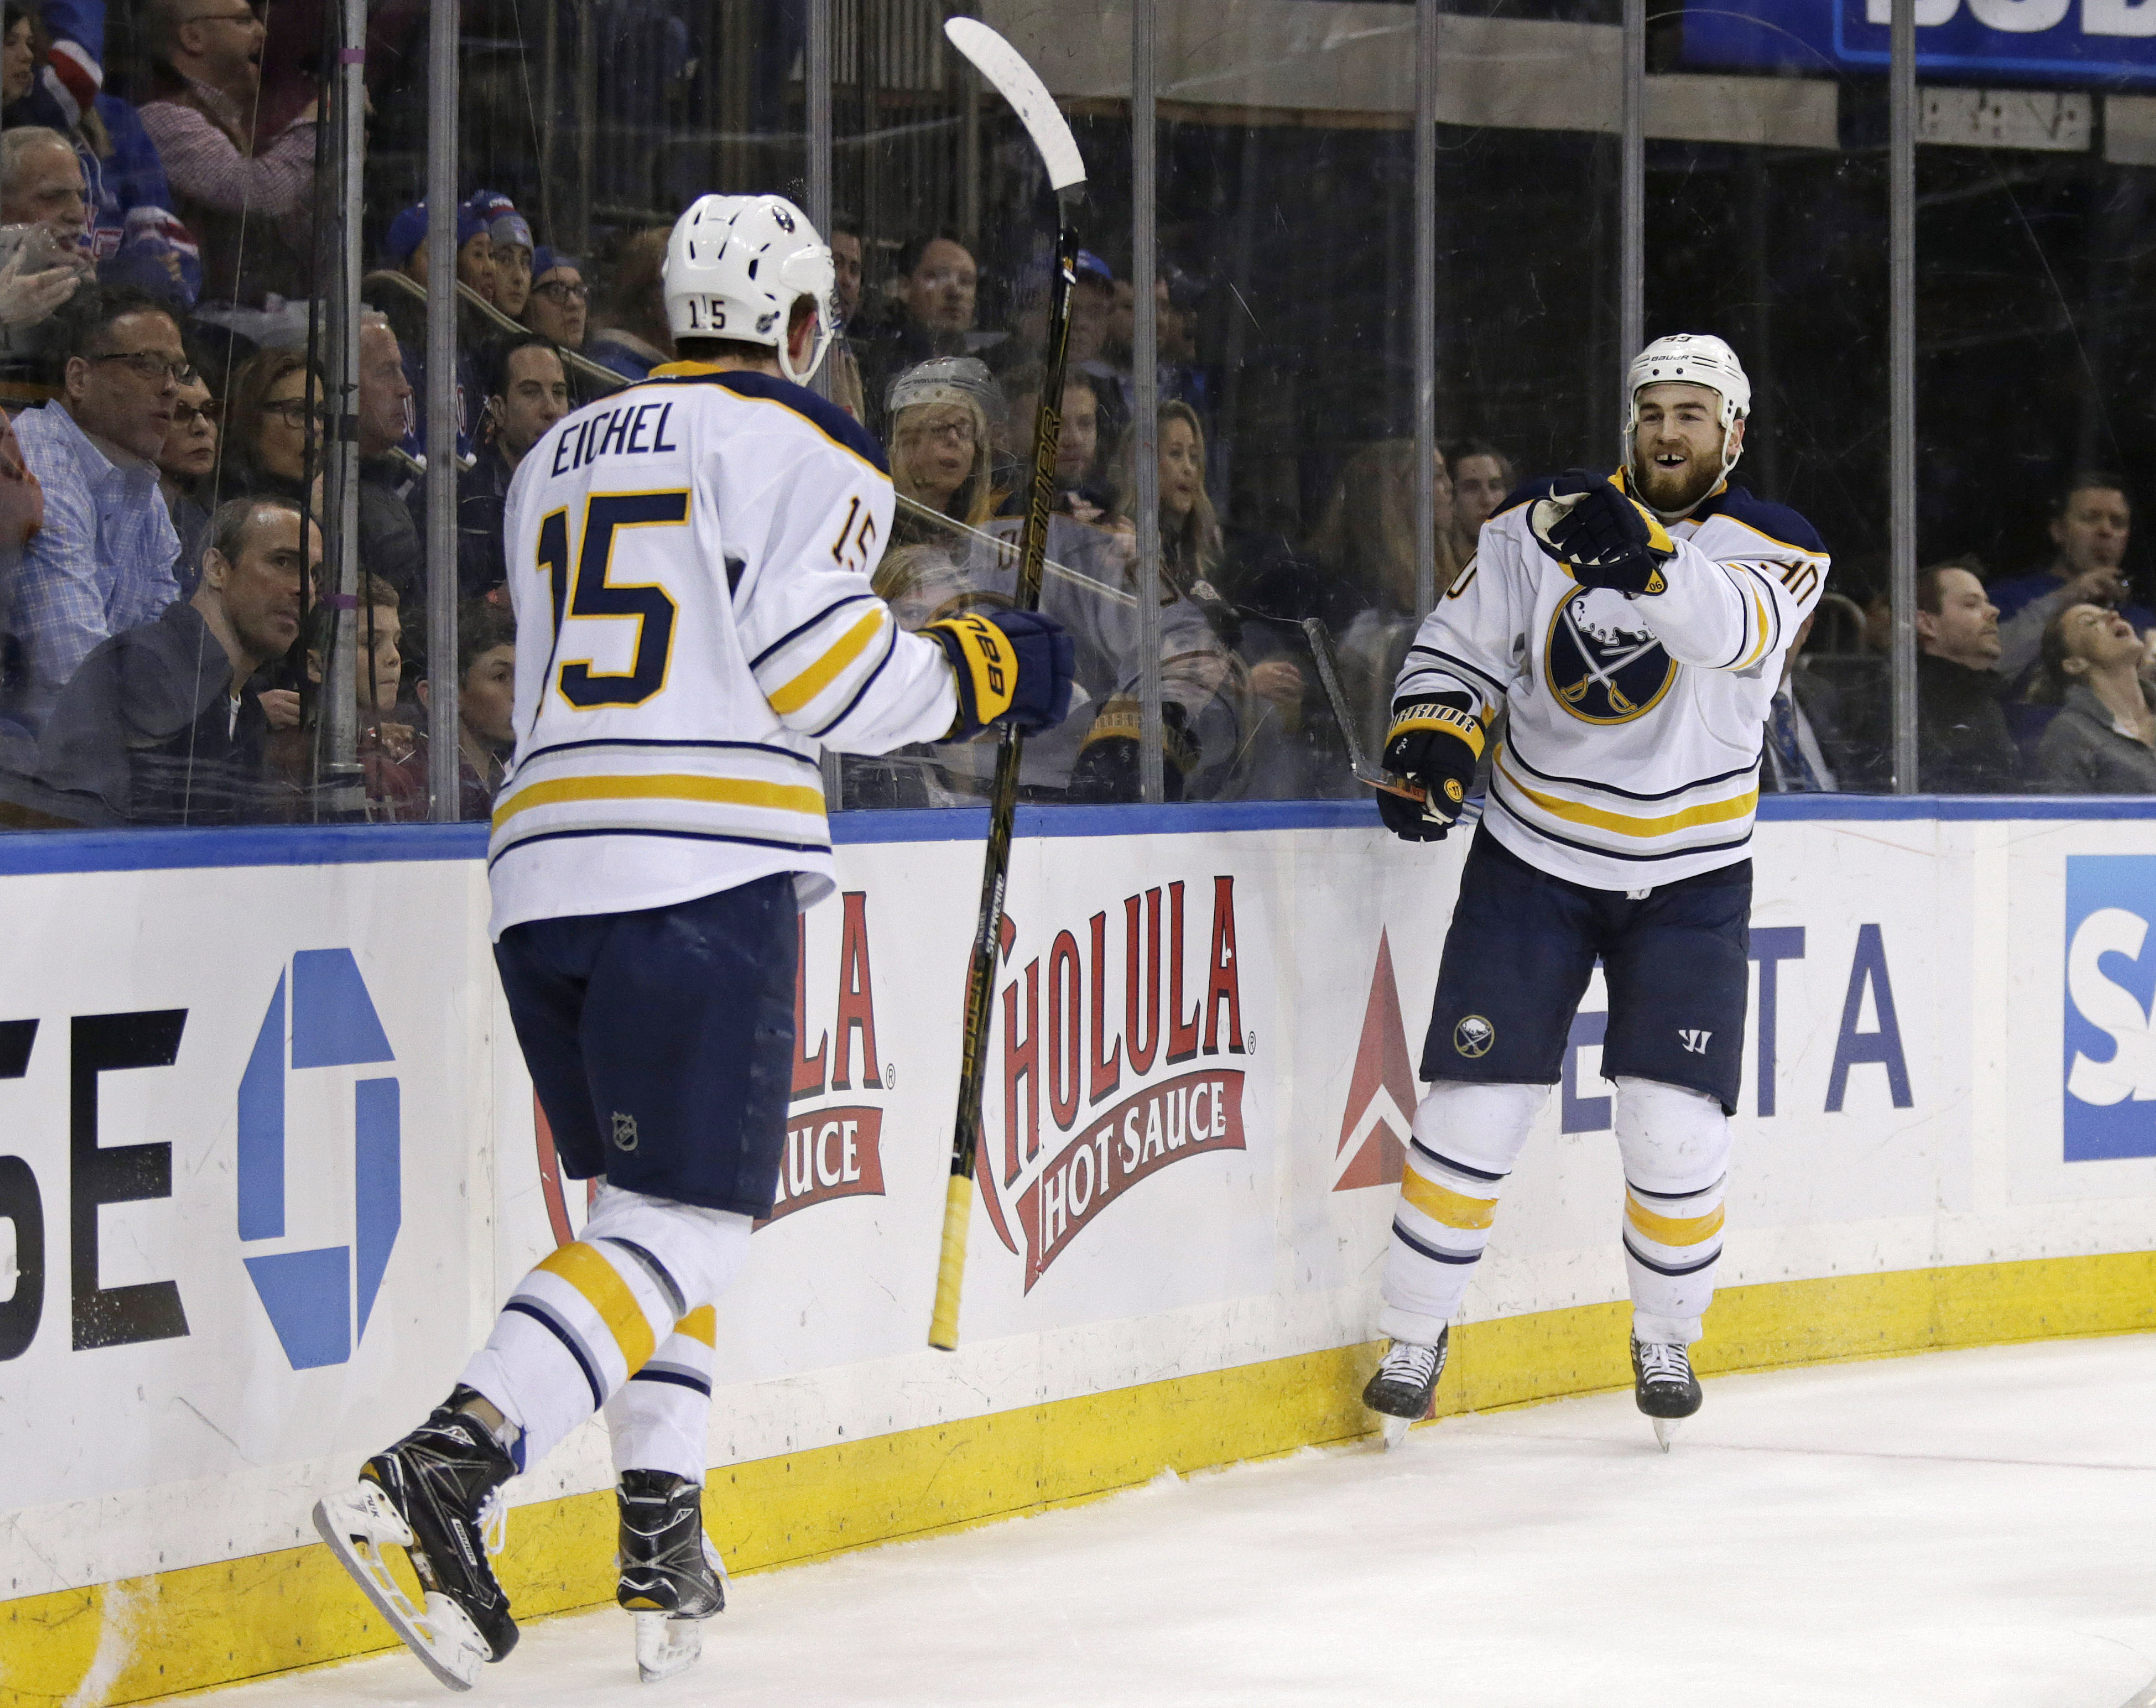 Sabres deny Rangers a clinched playoff berth with win